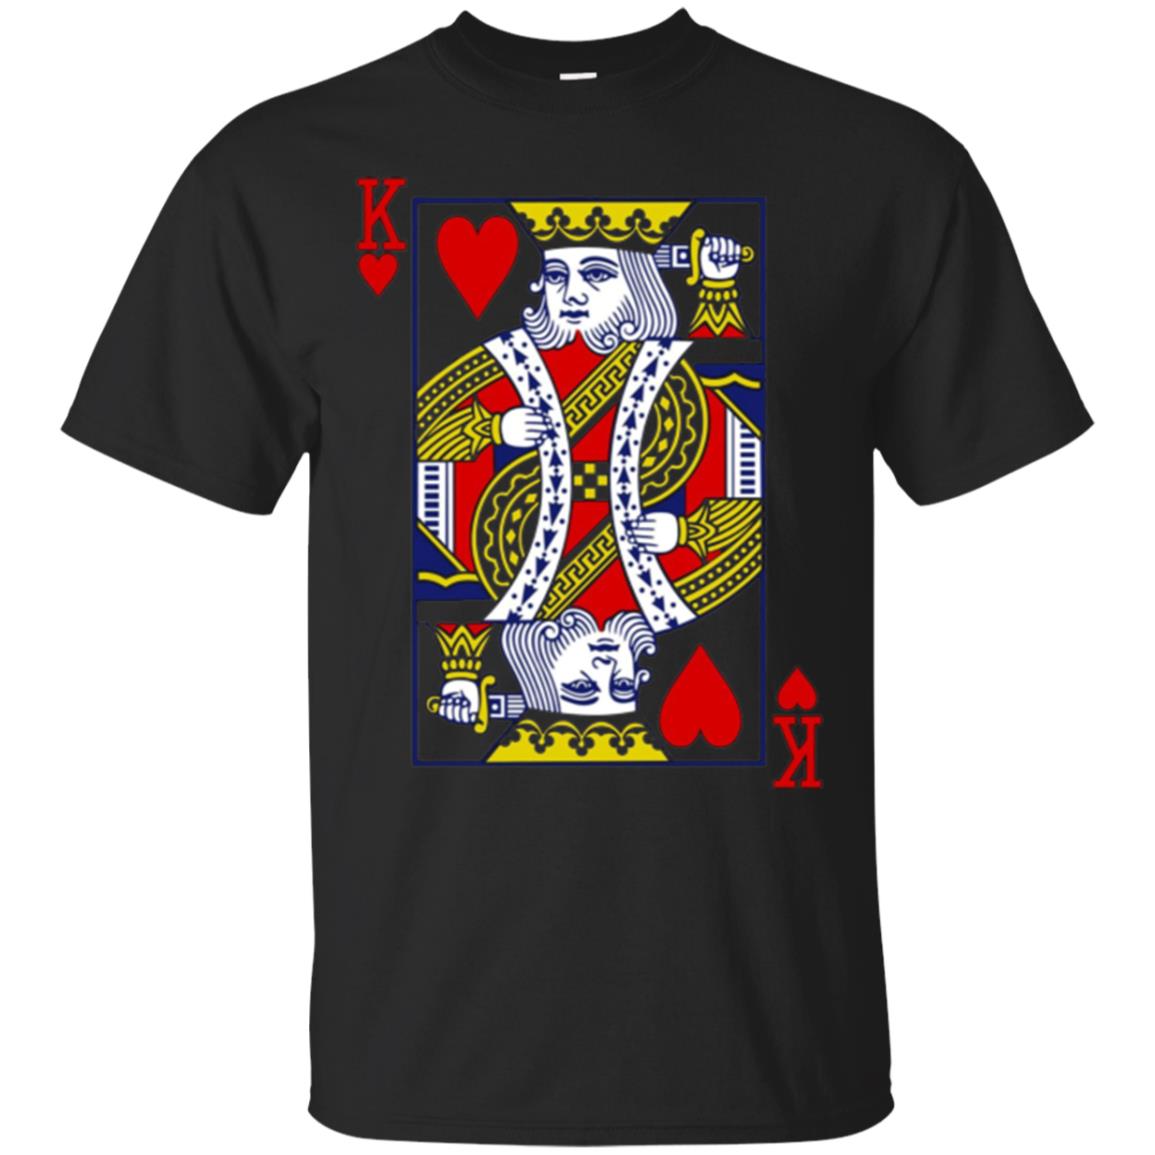 The Original King Of Hearts Suicide King T Shirt